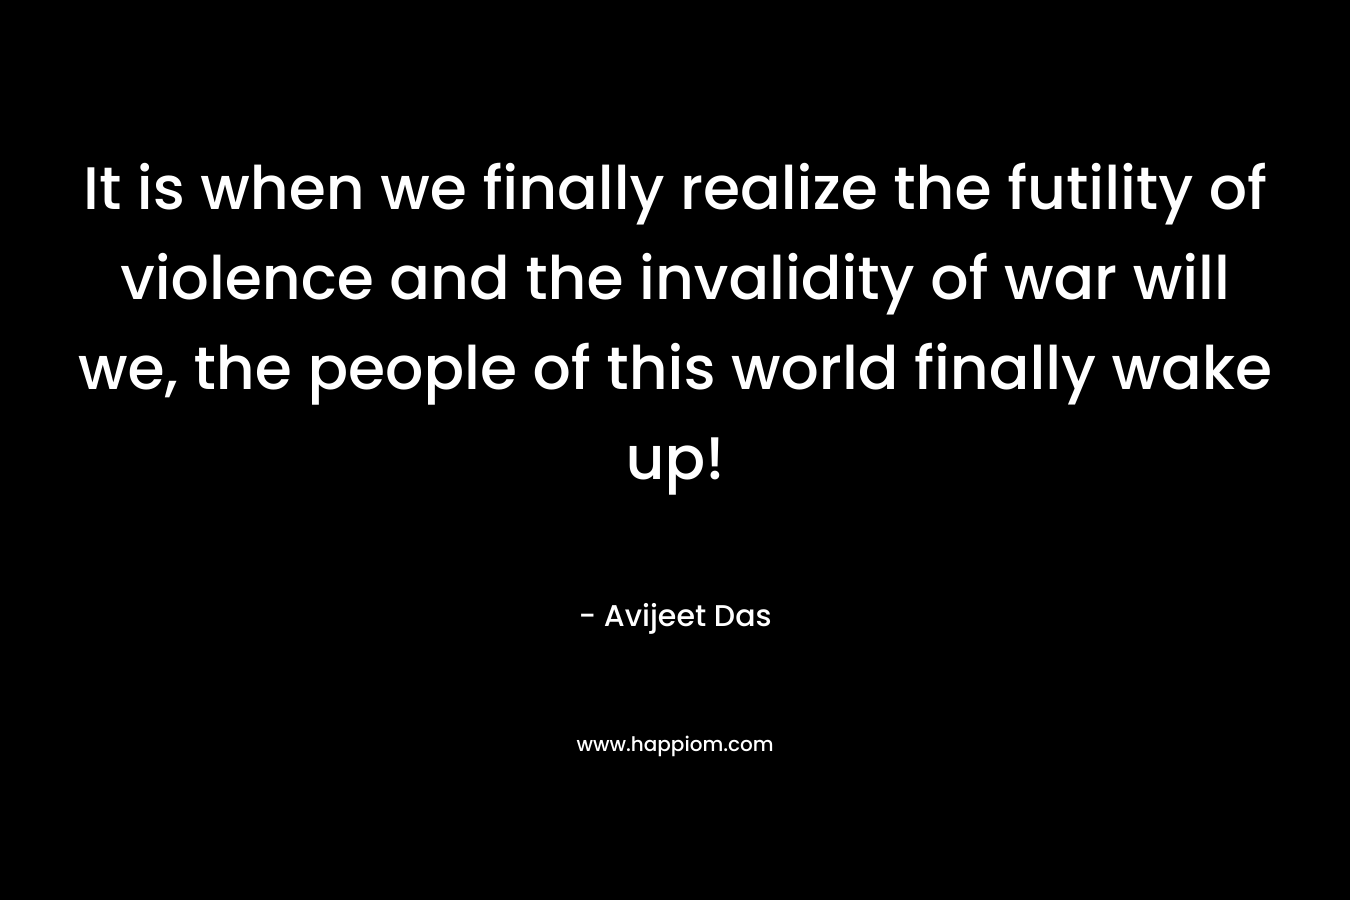 It is when we finally realize the futility of violence and the invalidity of war will we, the people of this world finally wake up! – Avijeet Das